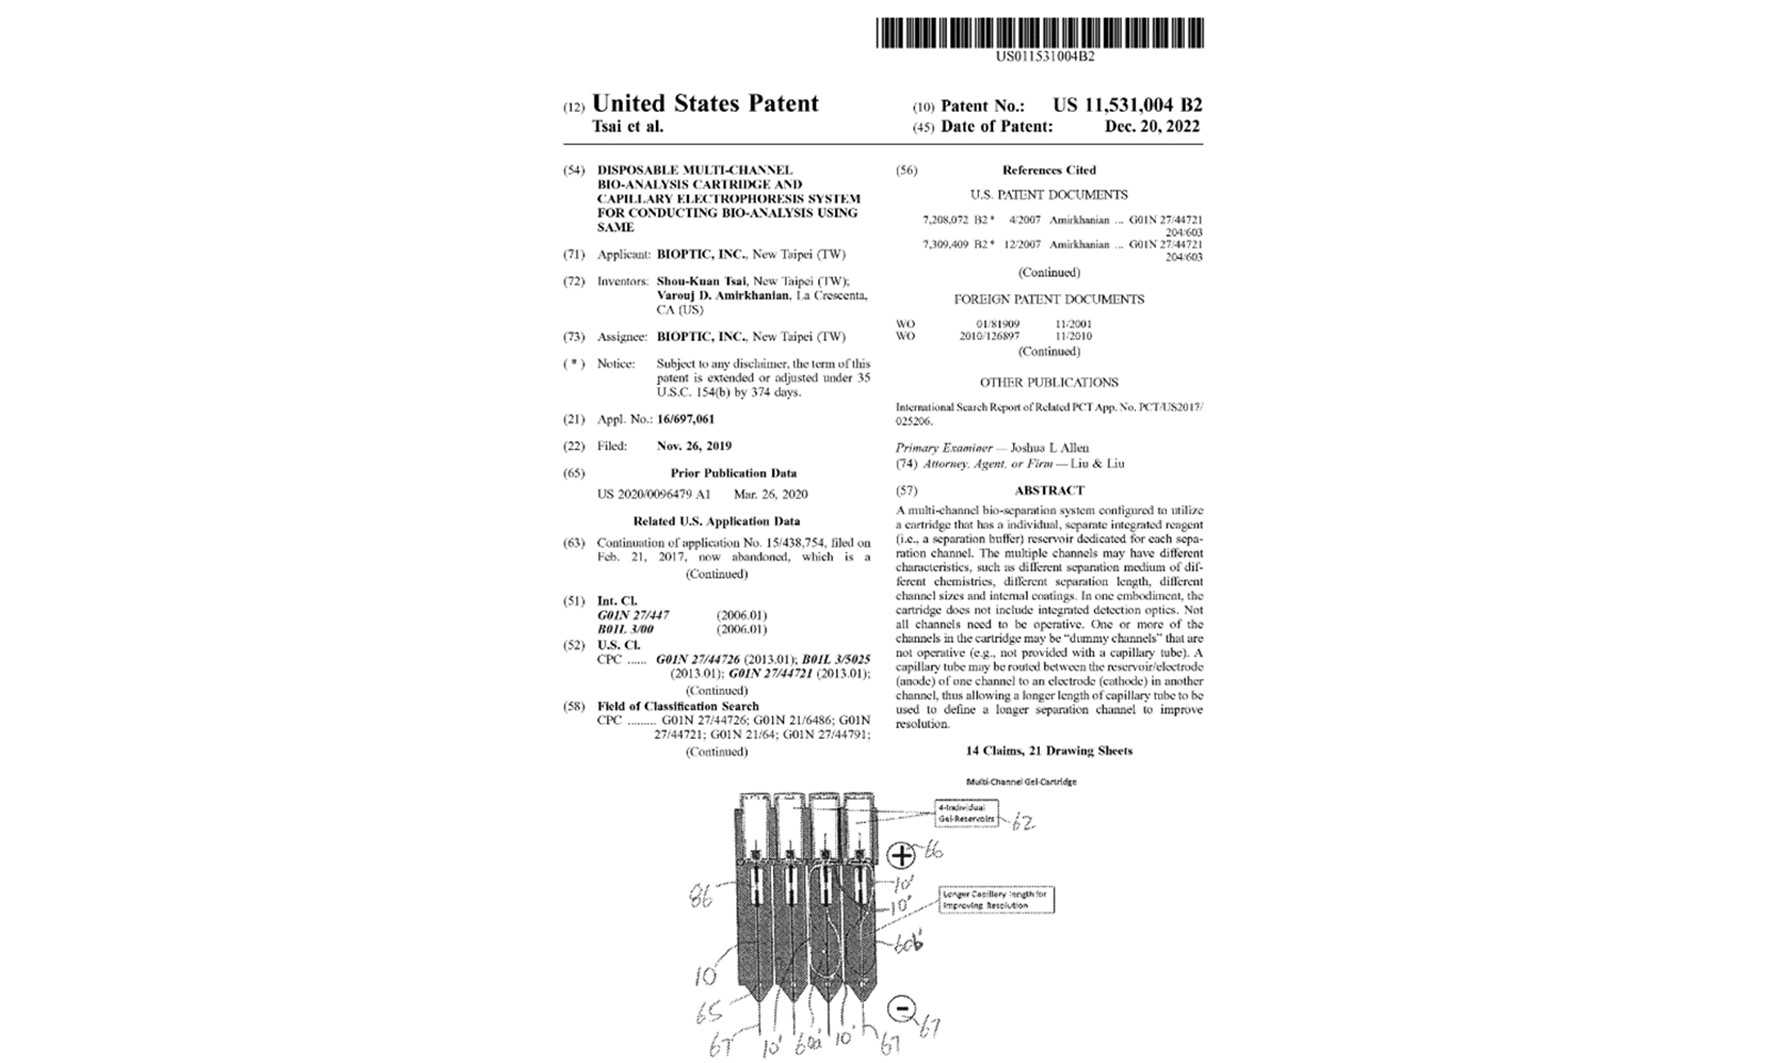 【Congratulations！】BiOptic has received an US patent